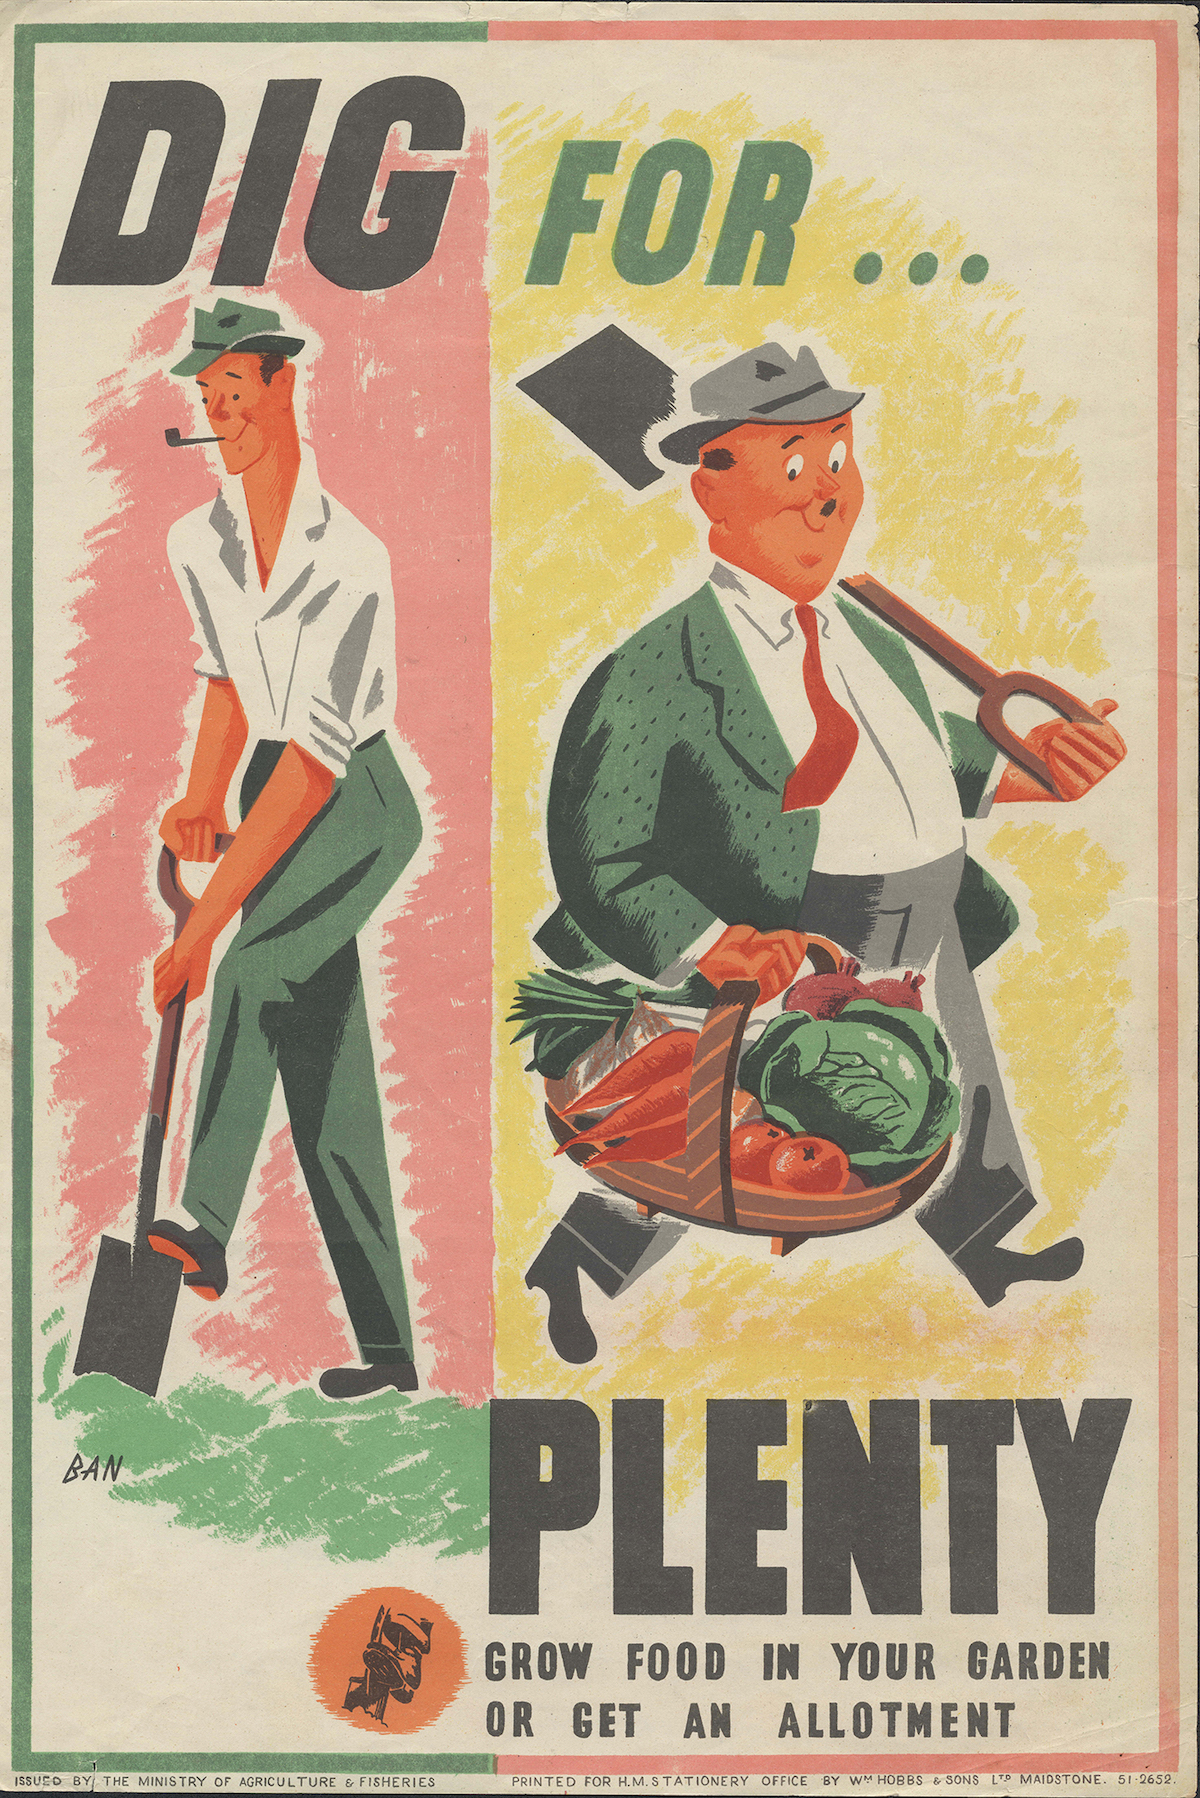 A 'Dig for Plenty' poster by an unknown, image courtesy of Robert Opie